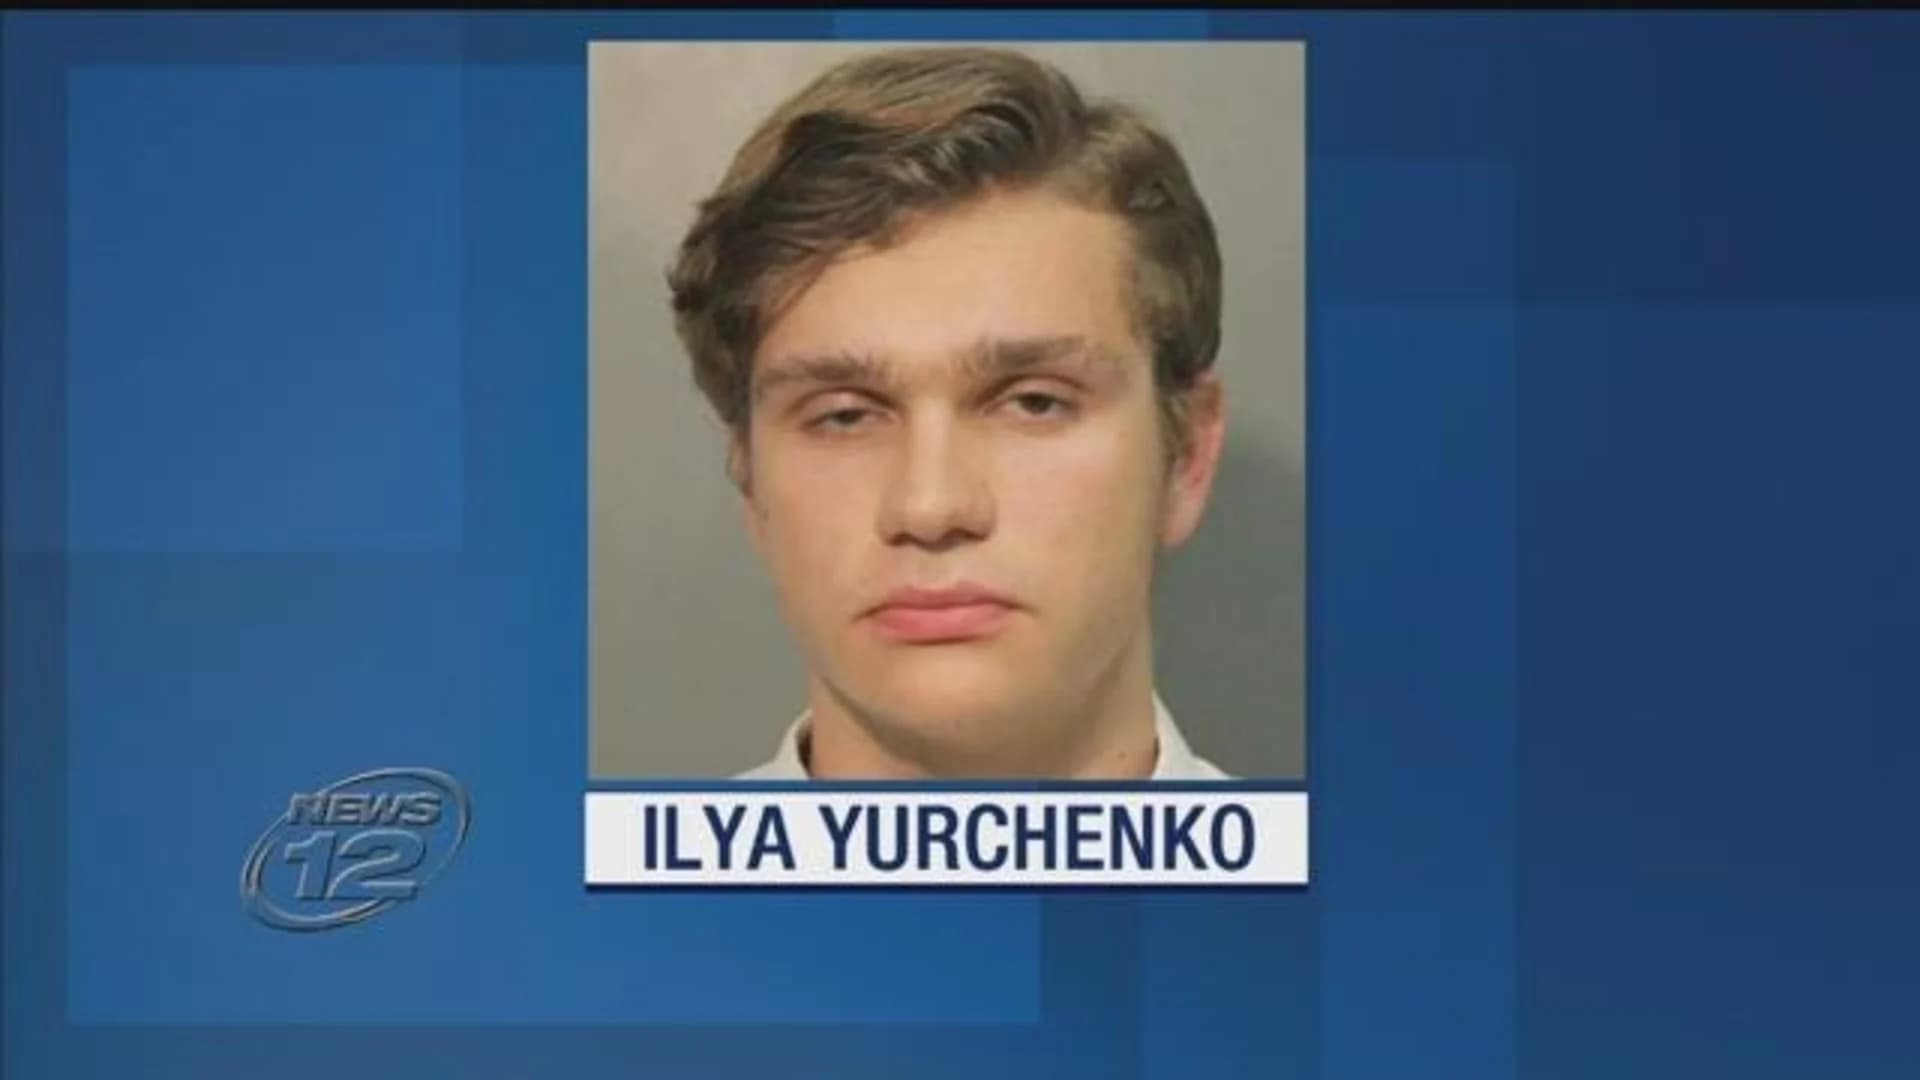 Police: 19-year-old student accused of trespassing at Syosset HS